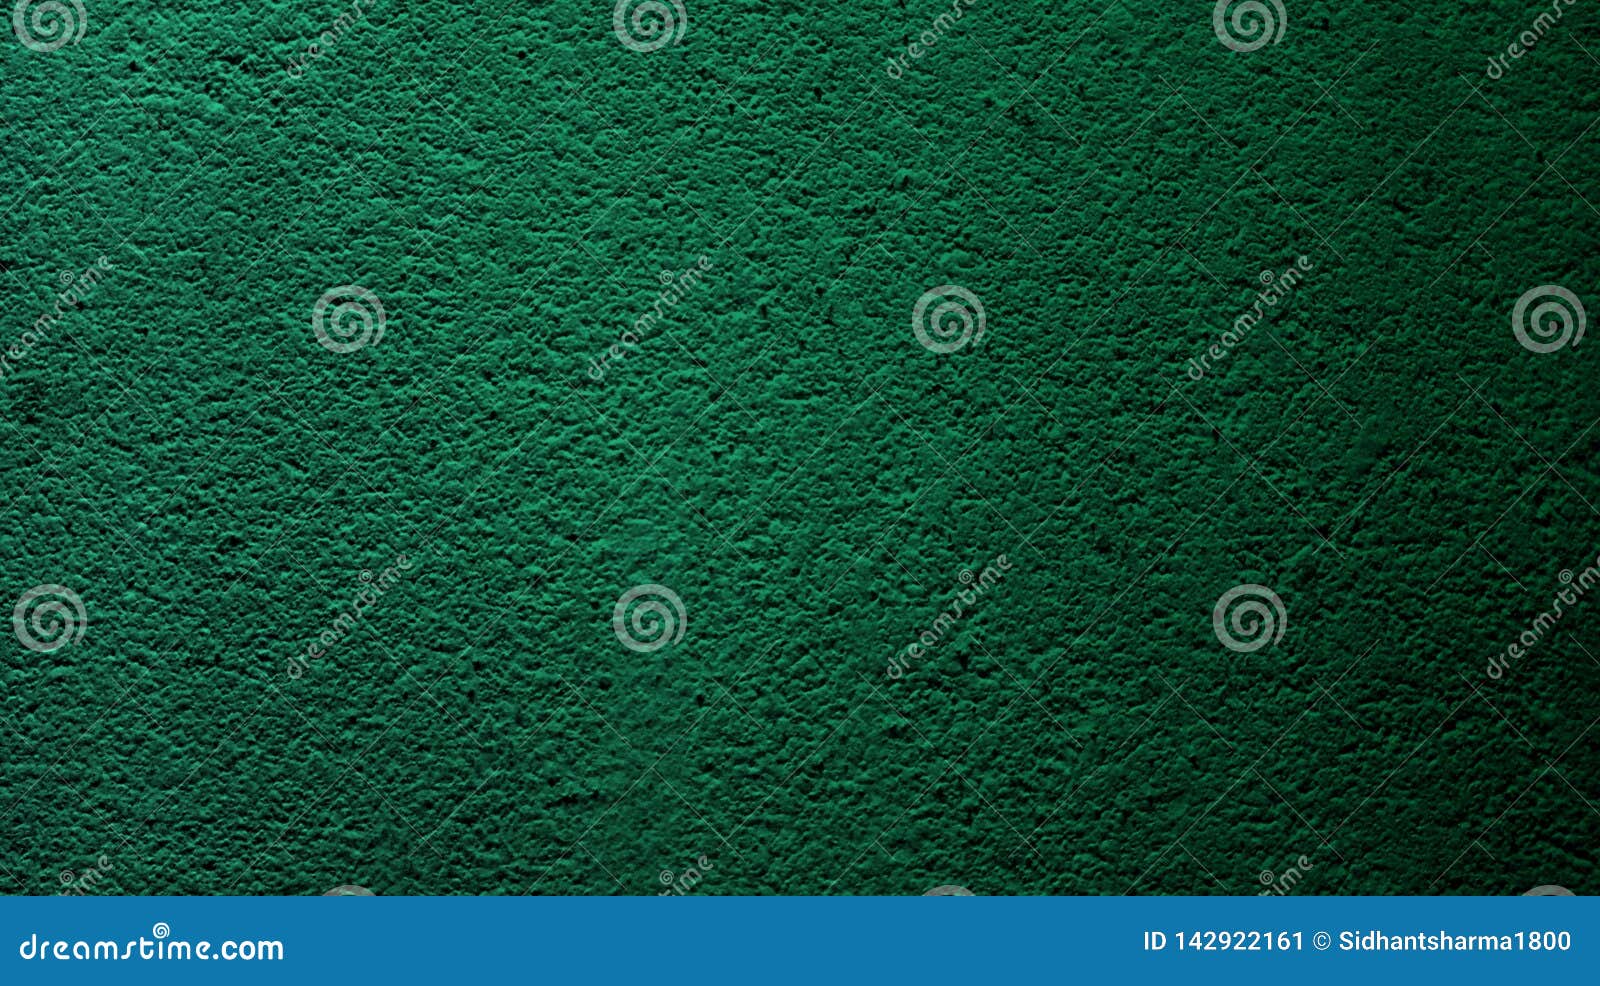 Abstract Dark Green Color with Wall Rough Dry Texture Background. Stock  Image - Image of page, book: 142922161